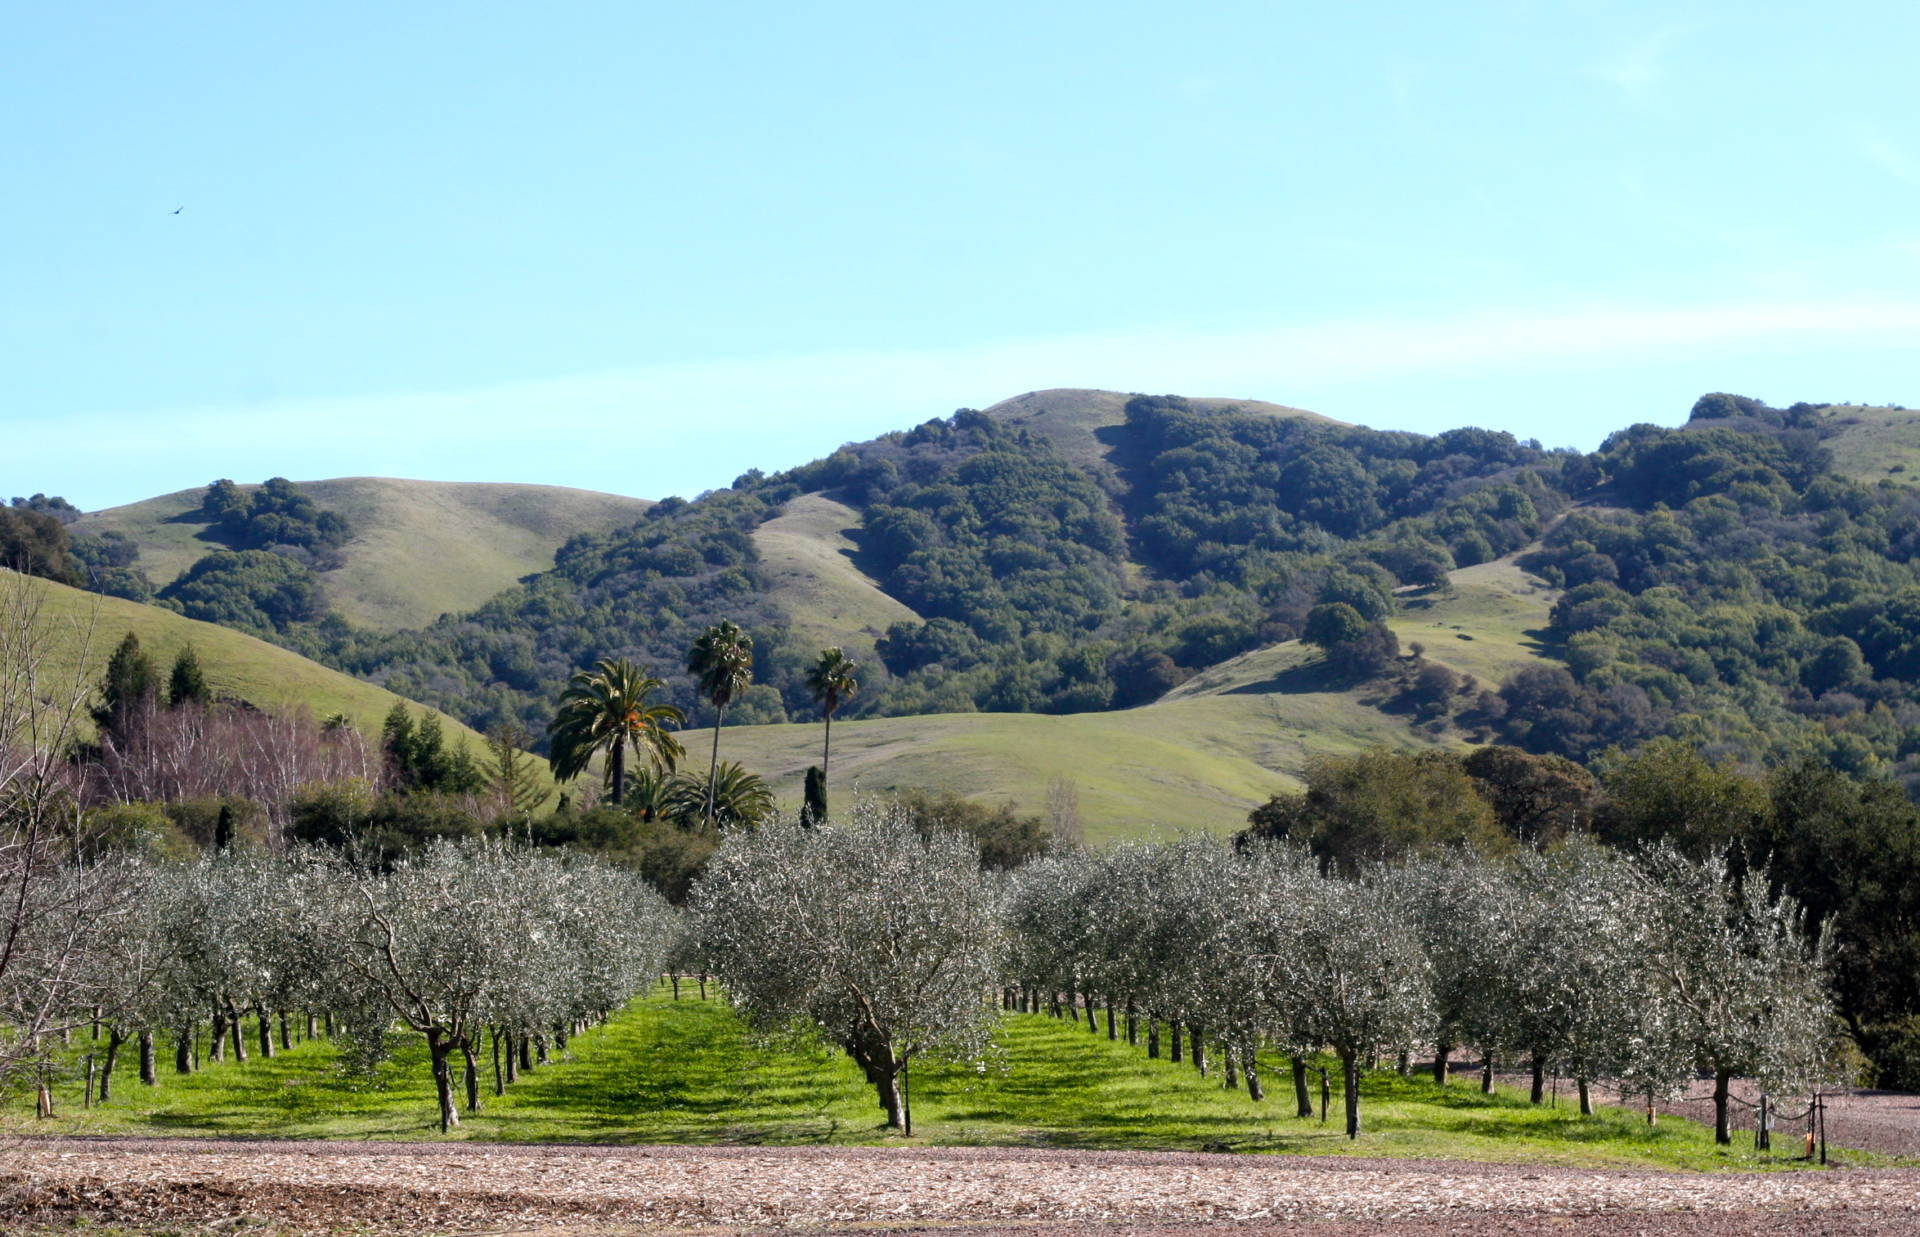 The stunning grounds (and olive trees) at McEvoy Ranch.